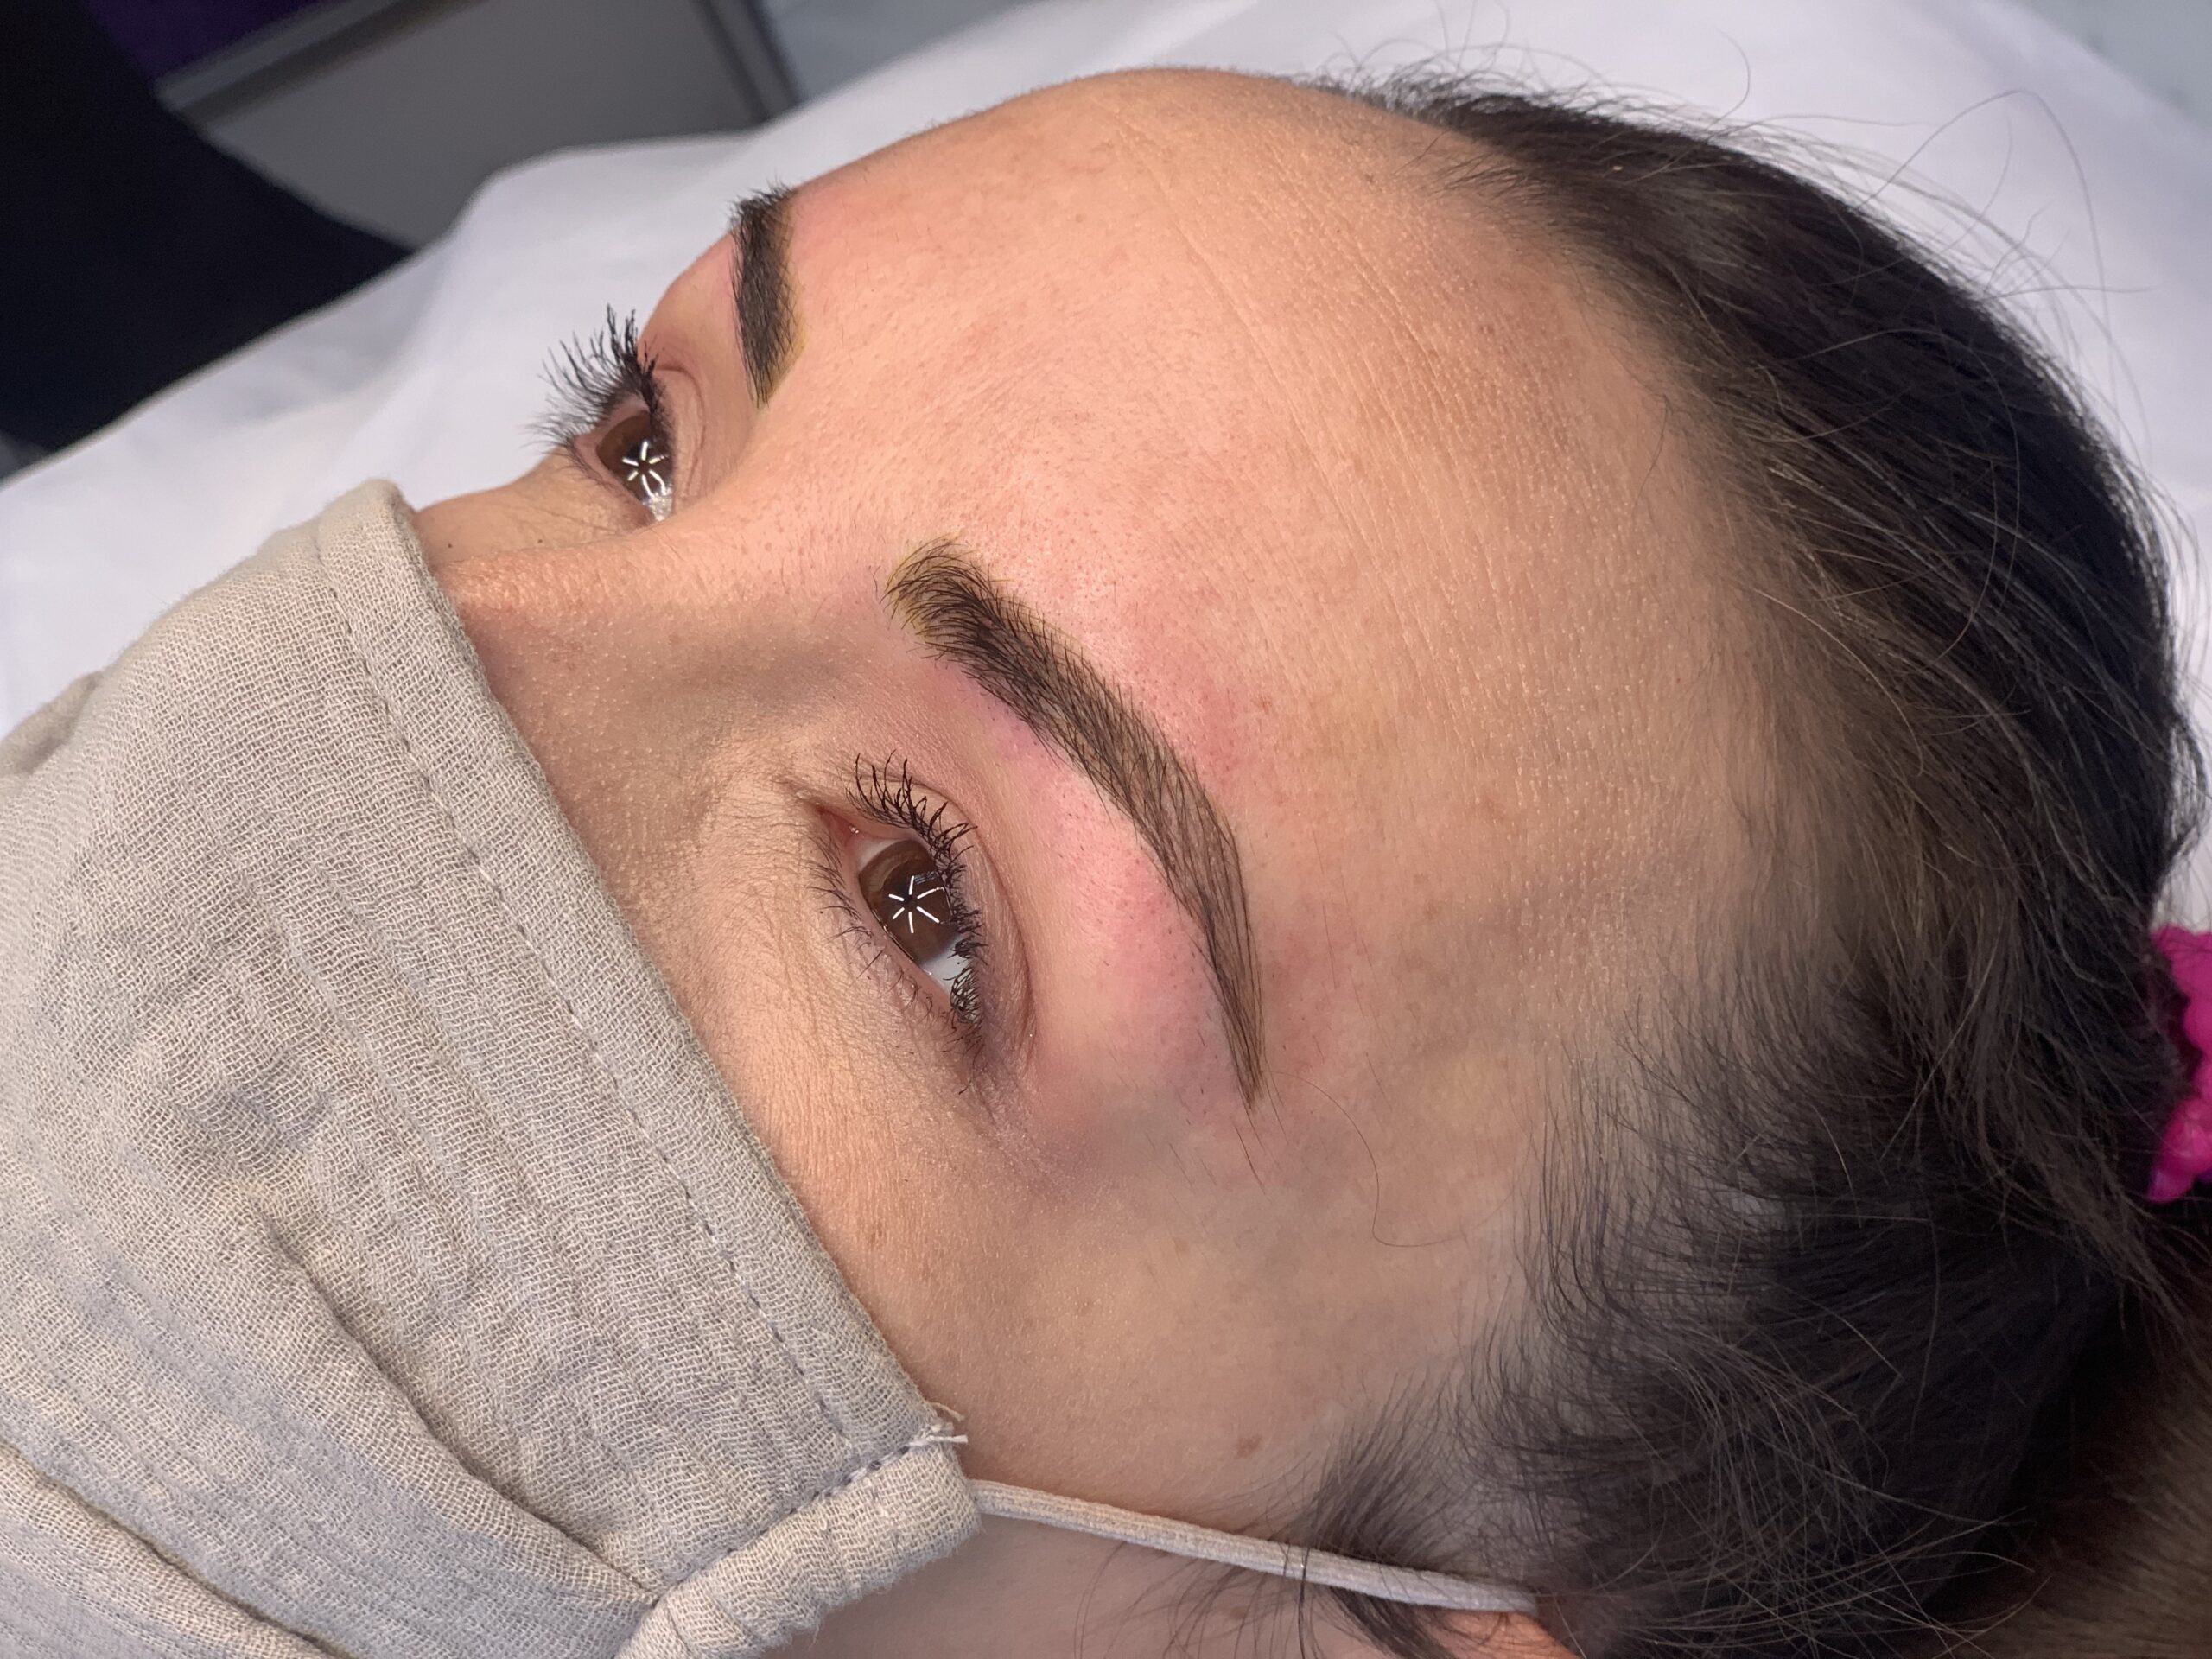 Beyond The Trend: Why Microblading Is Ushering a New Beauty Renaissance That’s Here To Stay